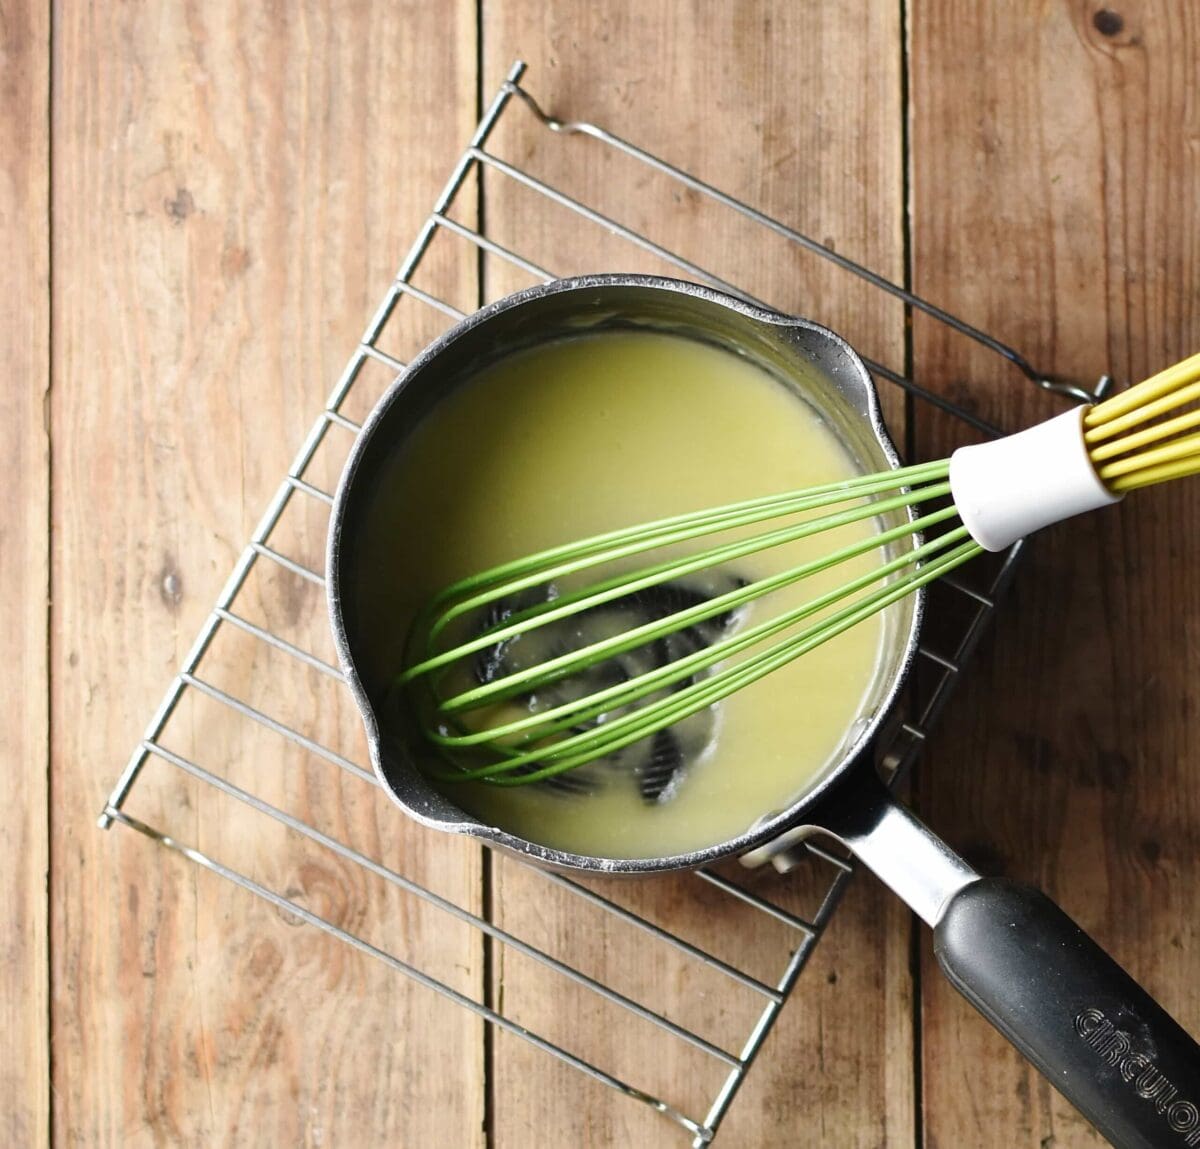 Roux sauce with green whisk in small saucepan.